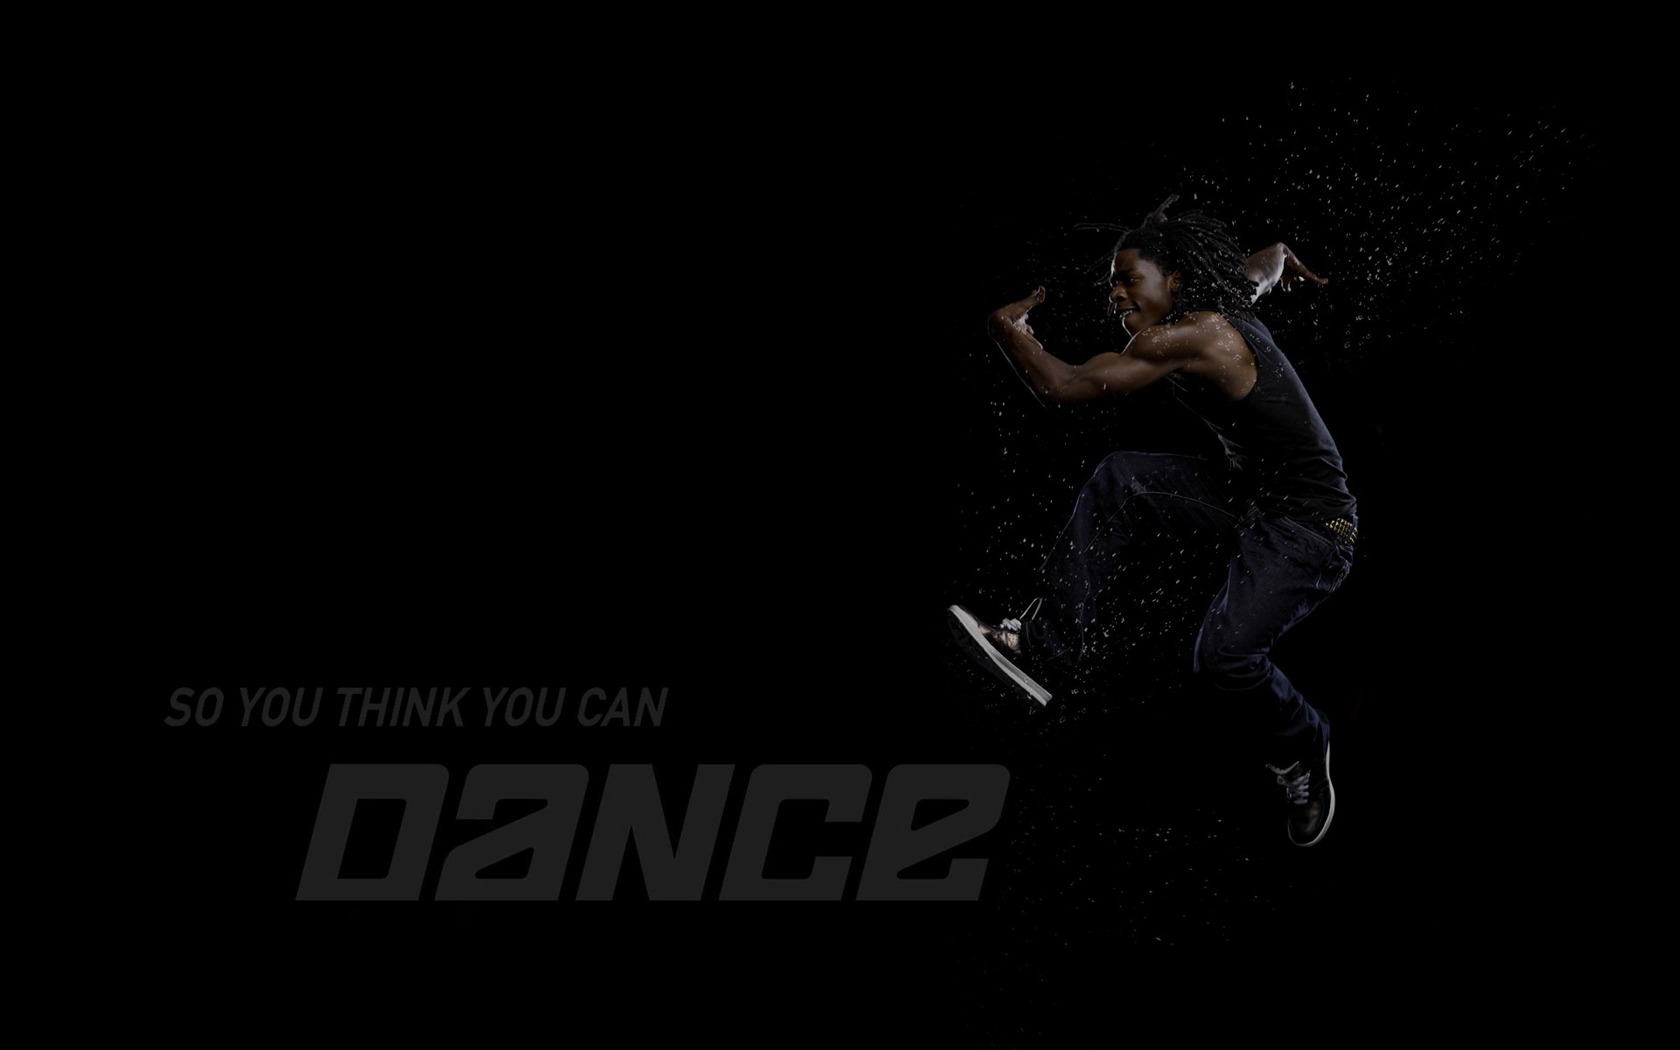 So You Think You Can Dance 舞林爭霸壁紙(二) #16 - 1680x1050